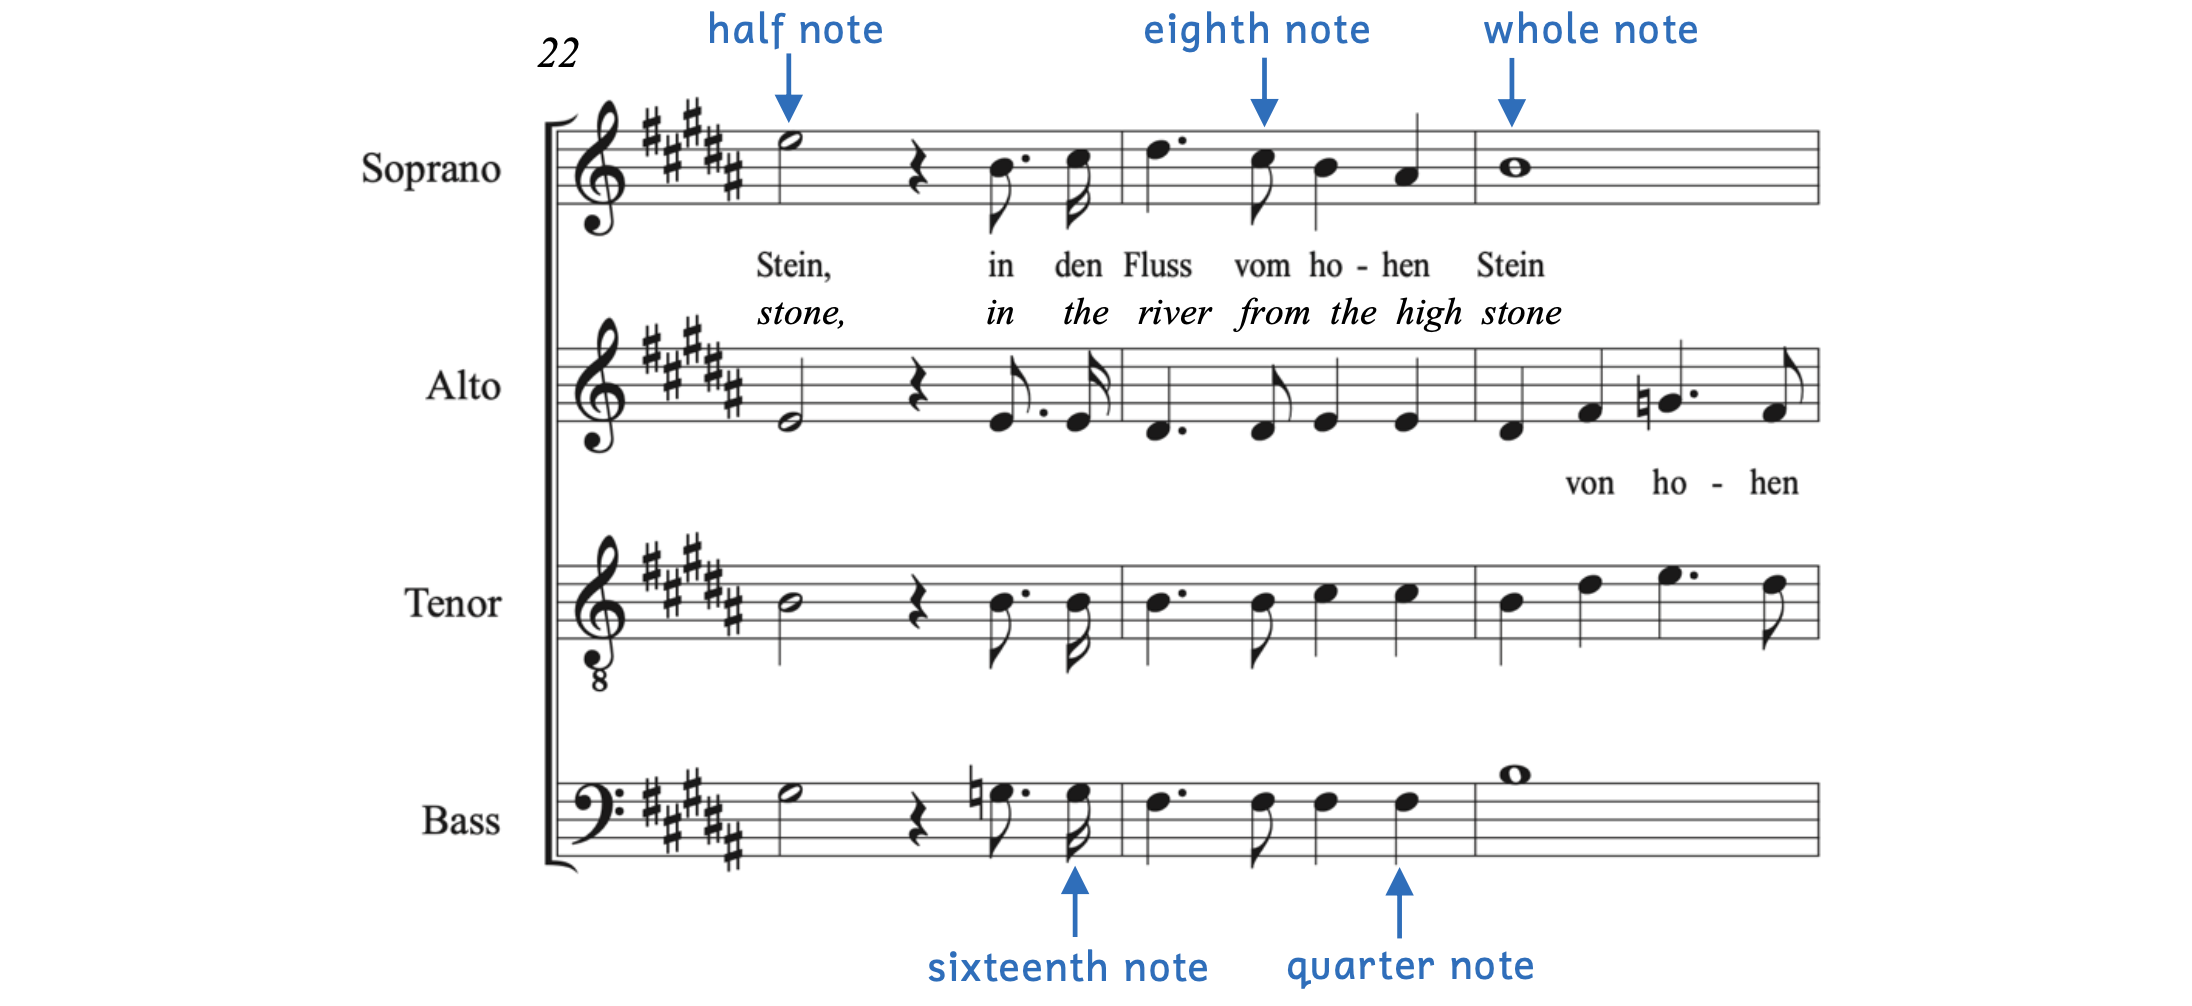 Different note values are pointed out in Hensel's “Hörst du nicht die Bäume rauschen,” Gartenlieder, Op. 3, No. 1. There is a half note, eighth note and whole note in the soprano part and a sixteenth note and quarter note in the bass part.